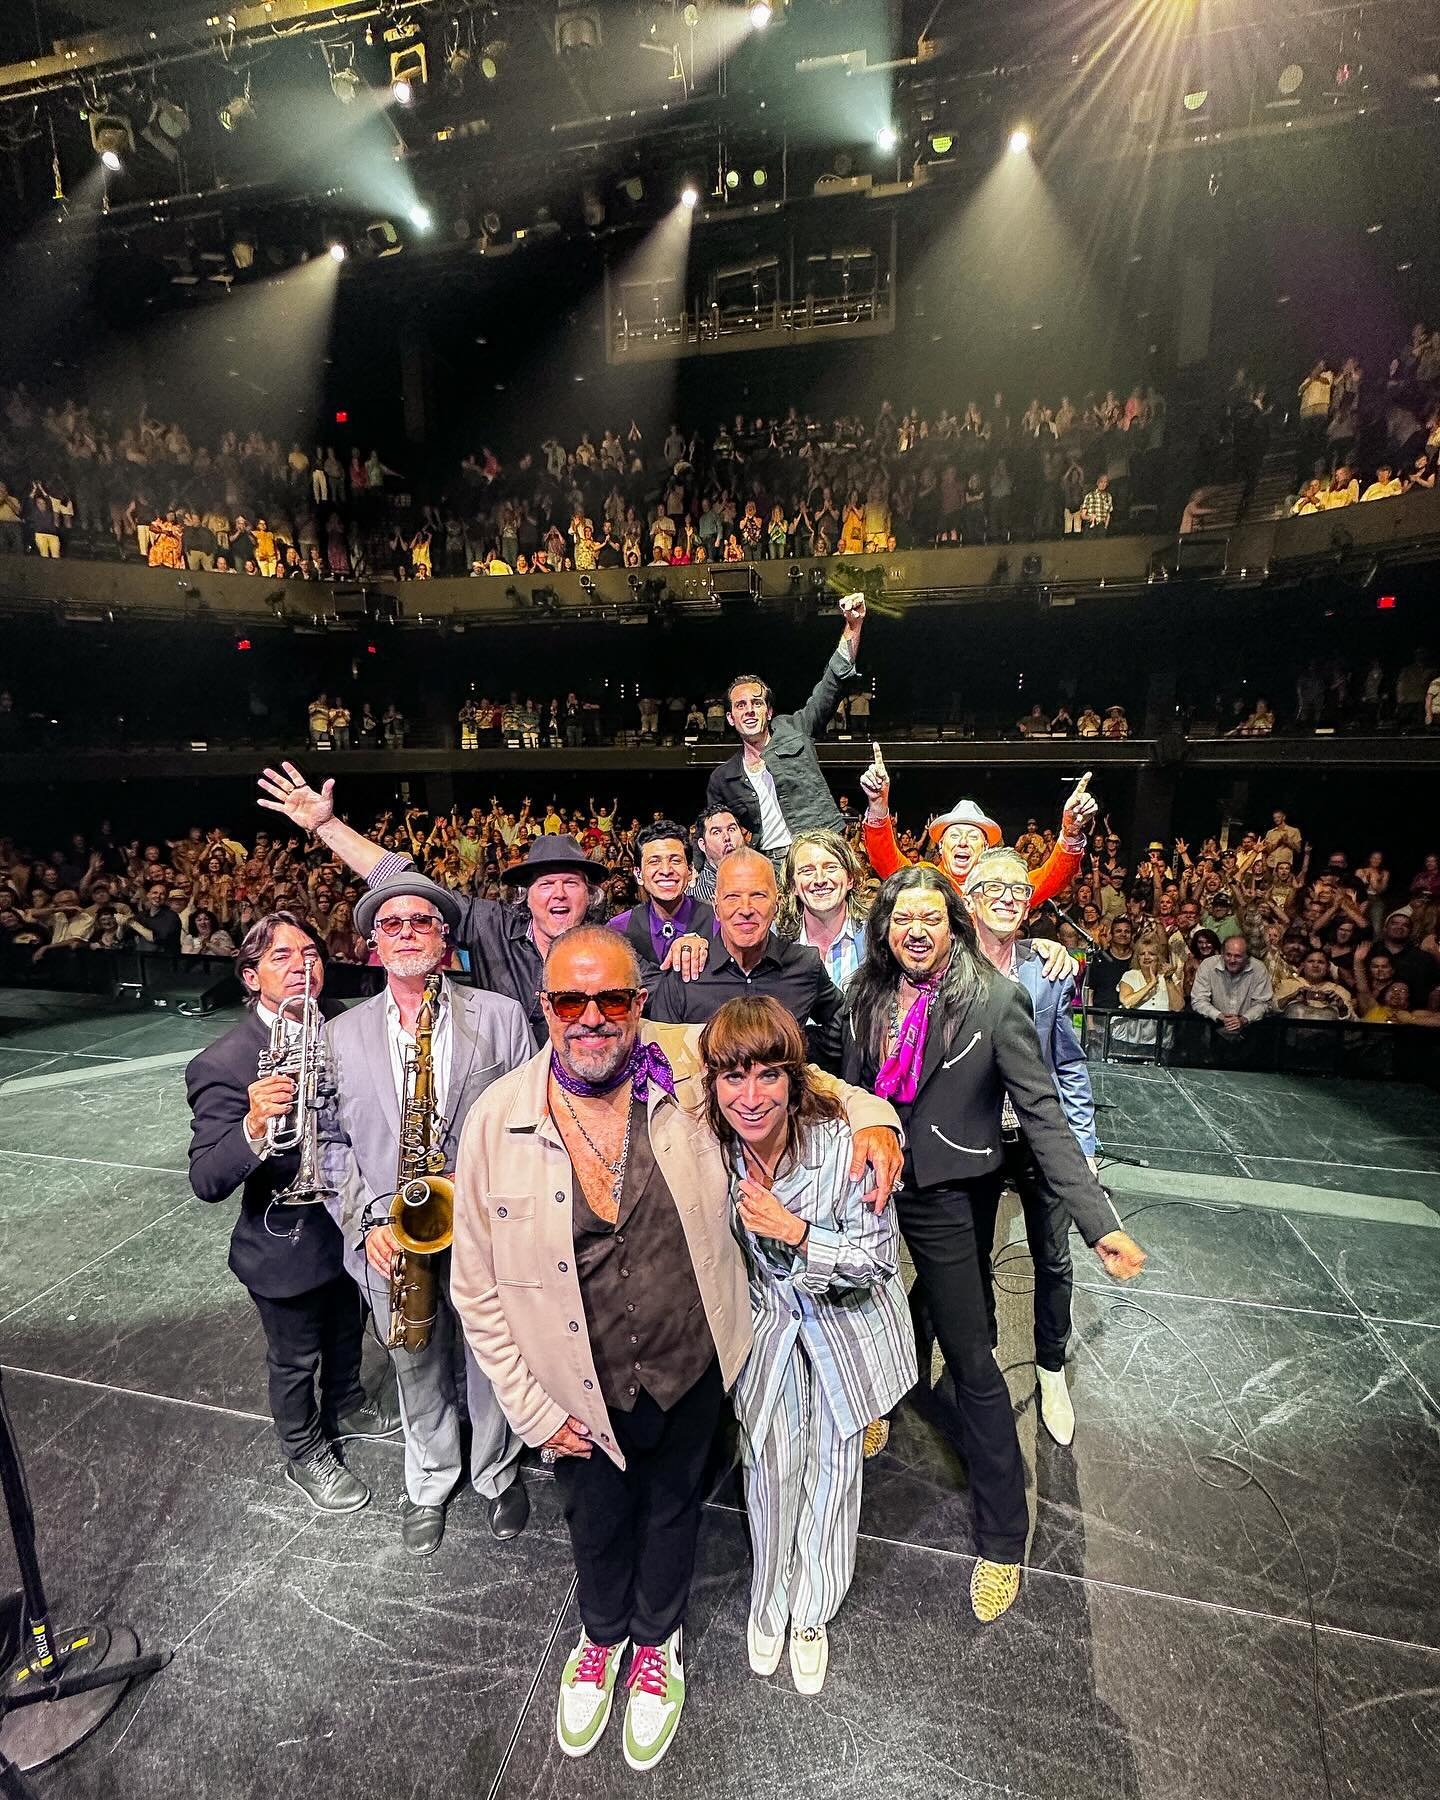 Phenomenal Night 1 from @acllive with our good friend @nicoleatkins!! 😎 Ready to do it ALL OVER AGAIN tonight! We&rsquo;ll see you soon!

Doors - 7pm
Nicole Atkins - 8pm
Mavericks - 9pm

📸 @michaelalanreynolds #TheMavericks #WorldTour24 #Austin